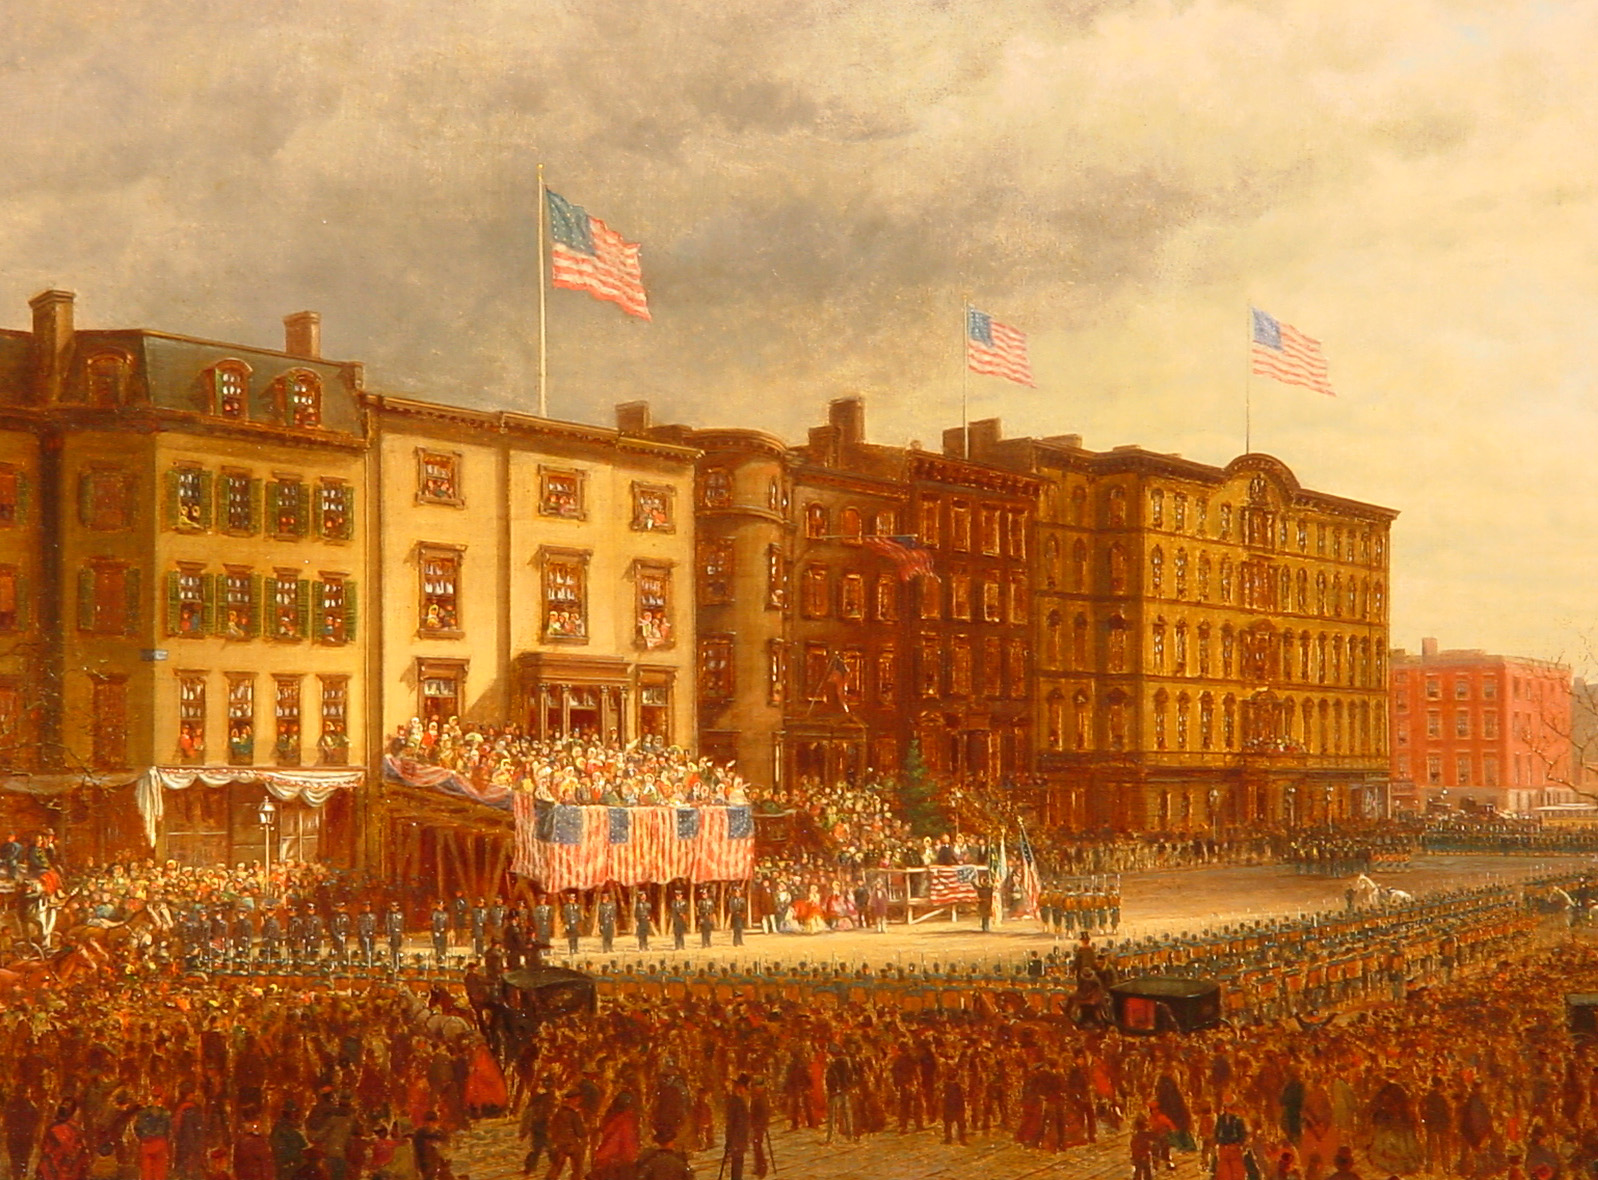 "The Presentation," a 19th century painting depicting a celebration for the first black Union Army soldiers from New York as they set off for battle in New Orleans.